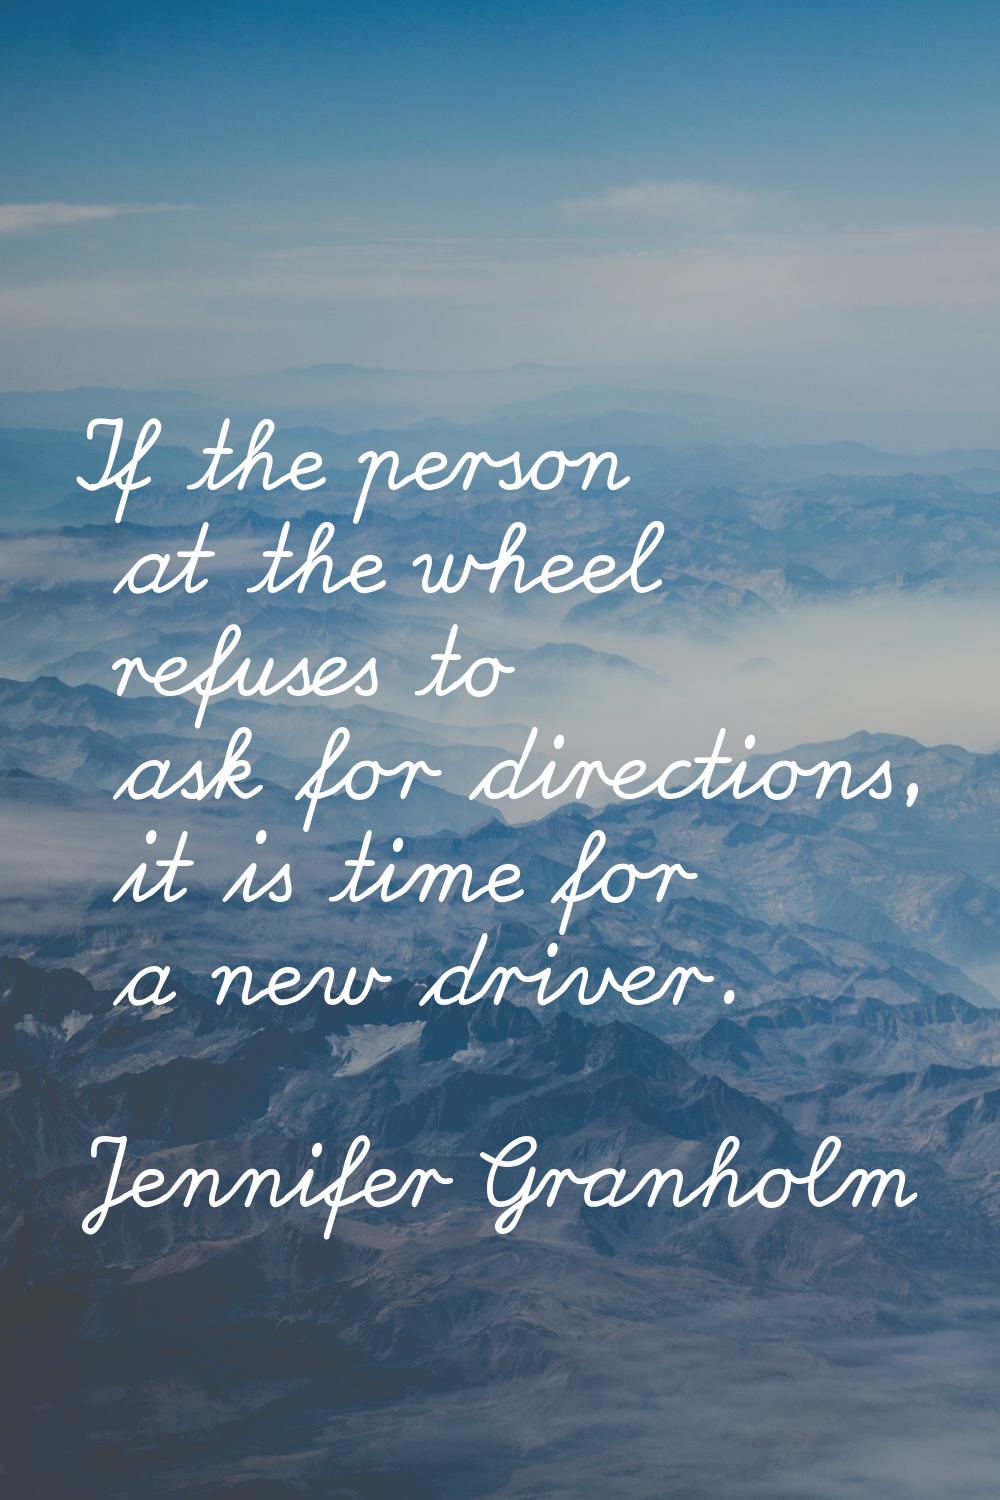 If the person at the wheel refuses to ask for directions, it is time for a new driver.